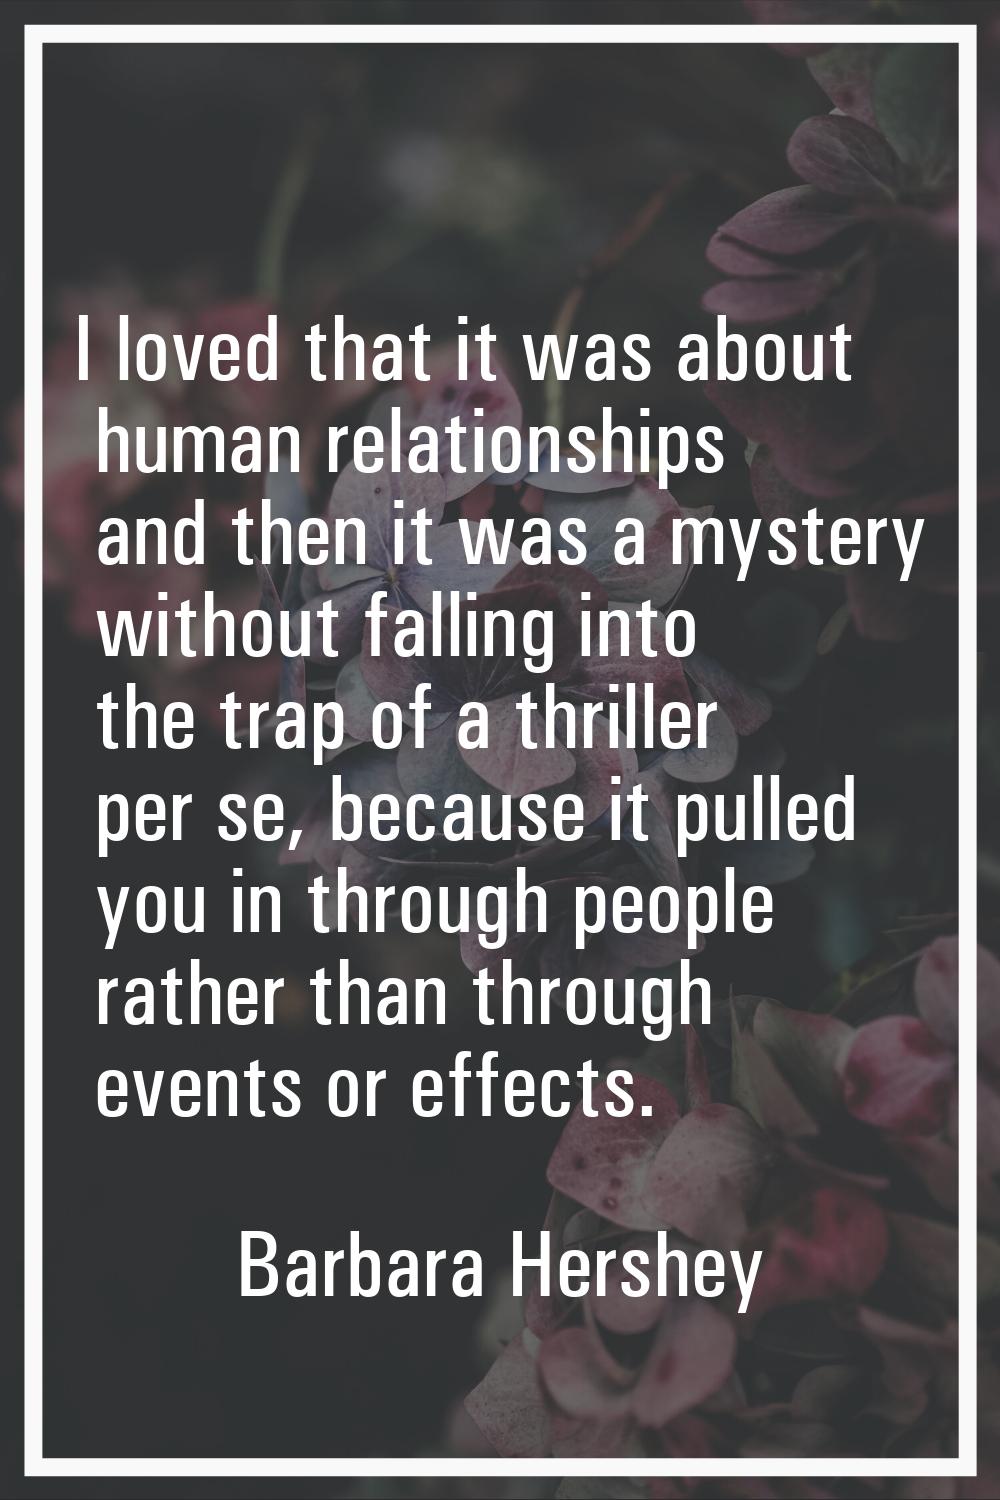 I loved that it was about human relationships and then it was a mystery without falling into the tr